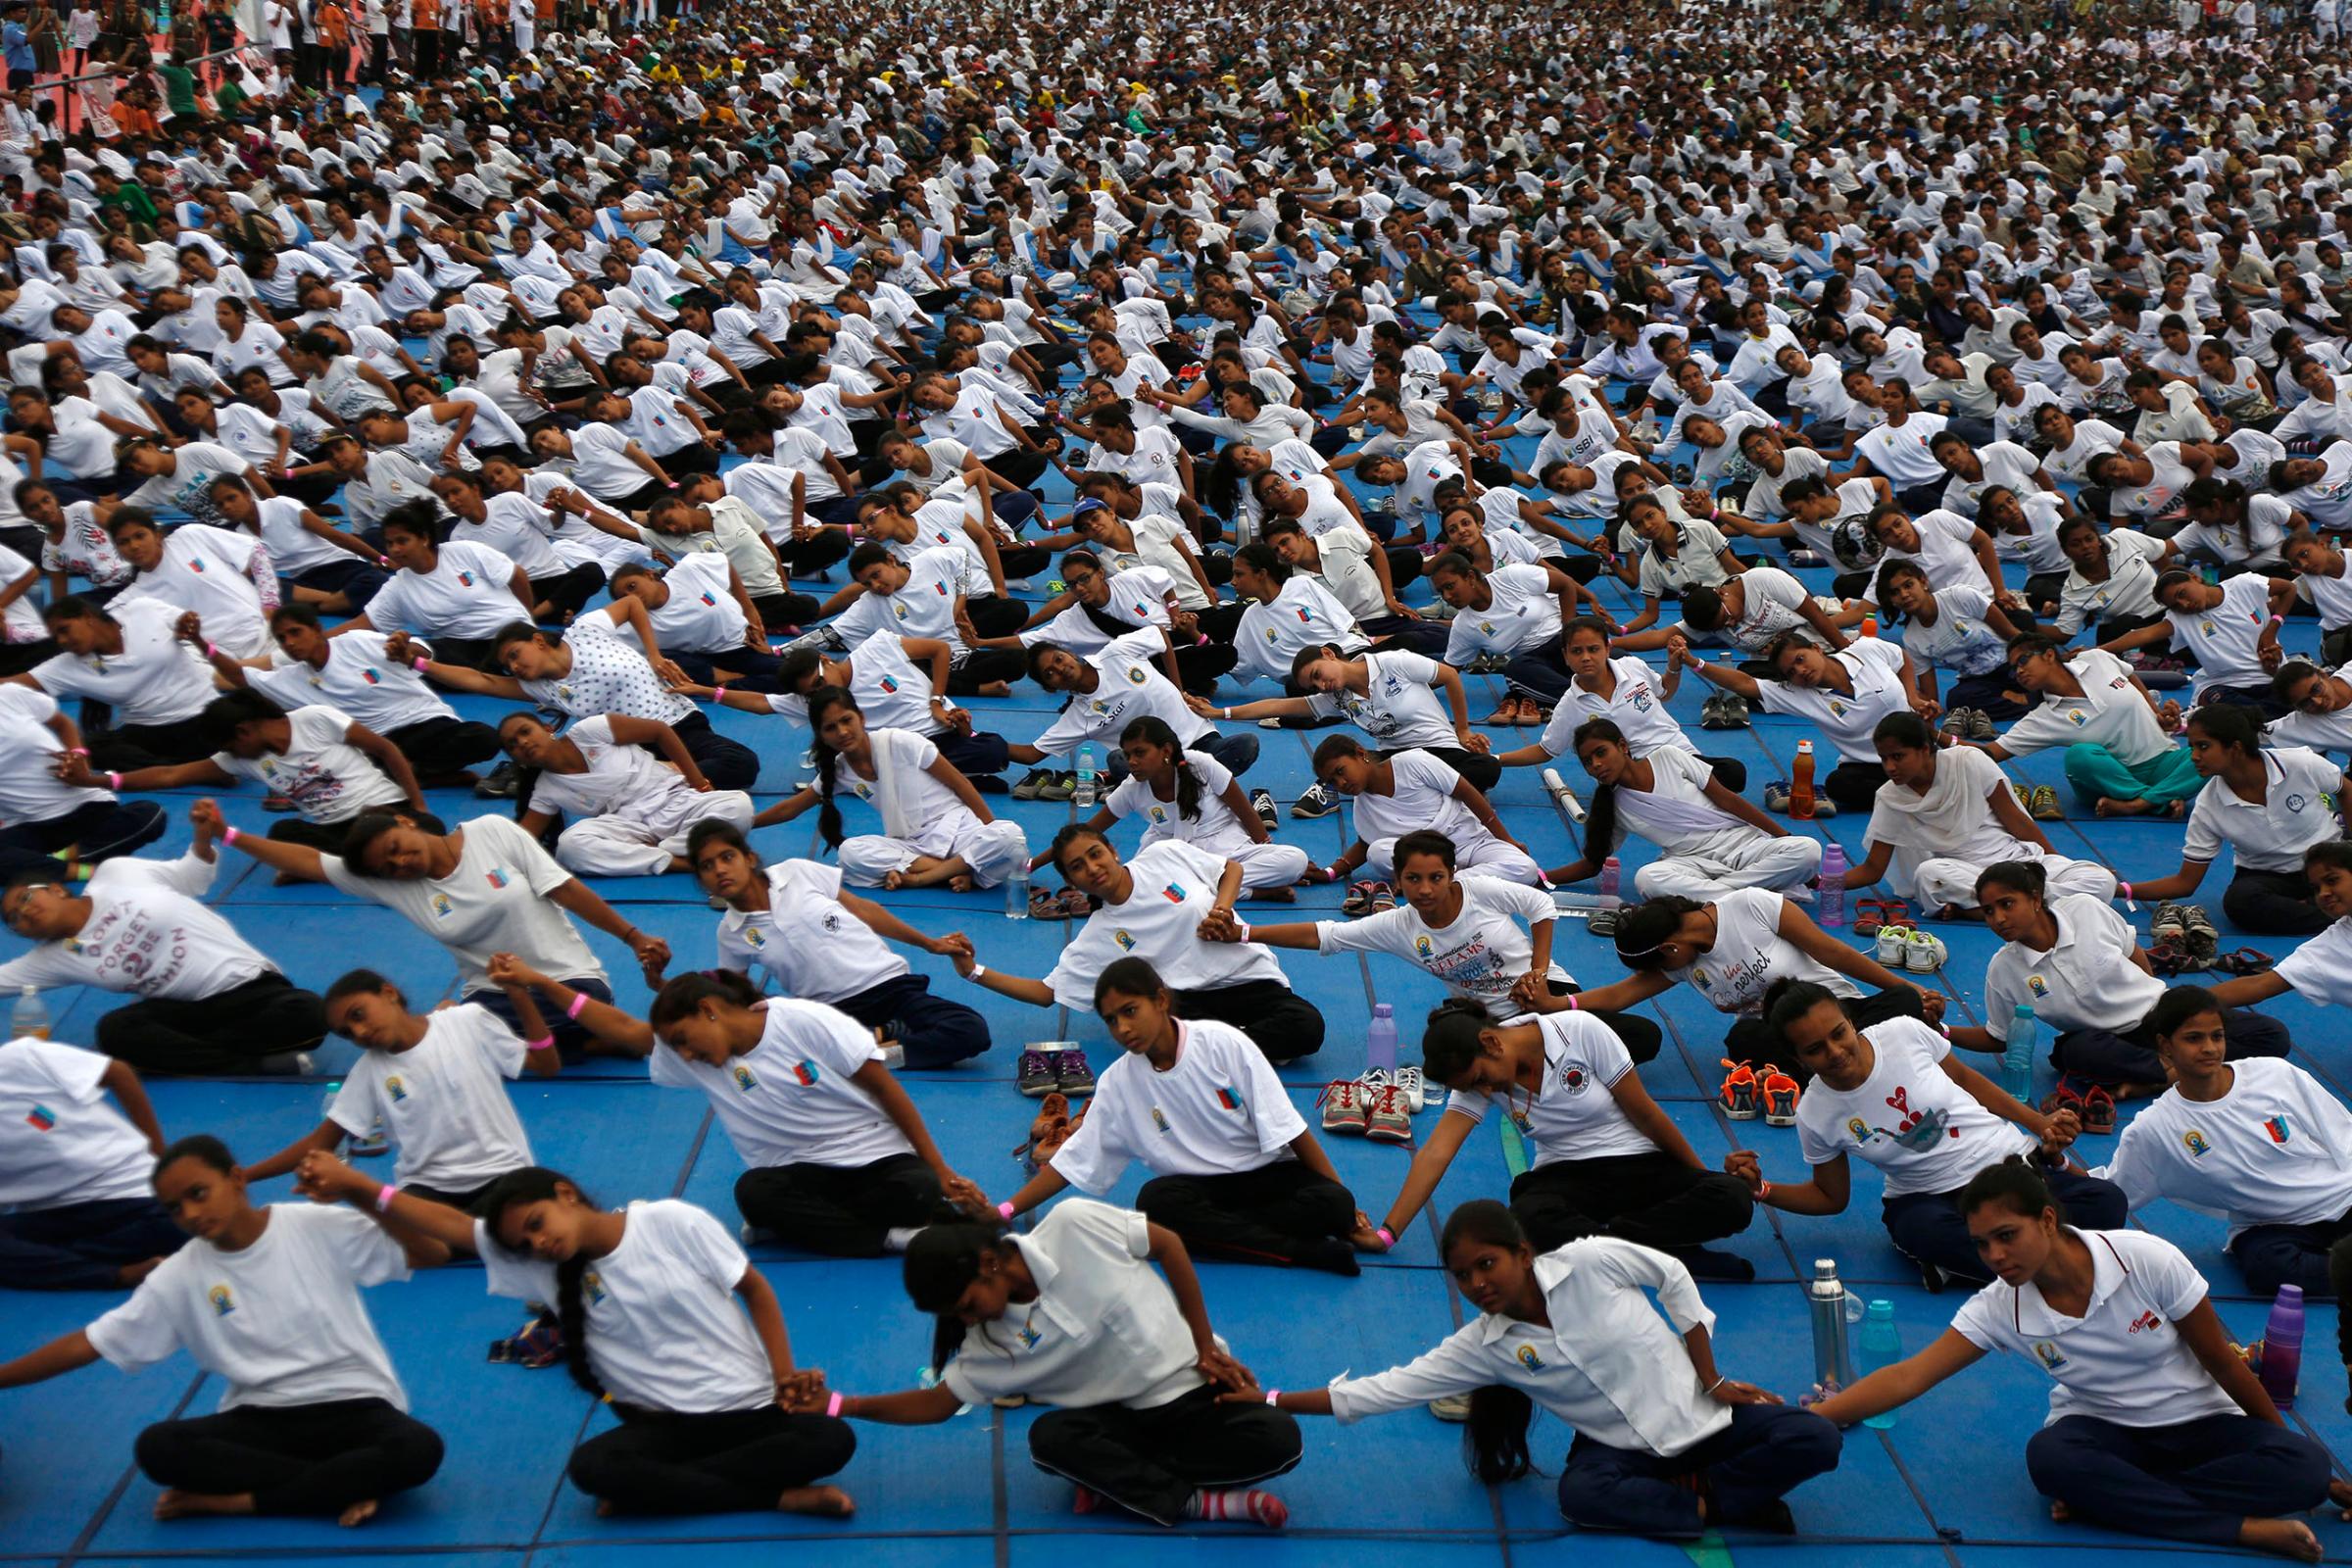 Indians holds hands as they attempt to create a record for the longest human yoga chain with more than 8000 participants at an event to celebrate International Yoga Day in Ahmadabad, India, June 21, 2016.